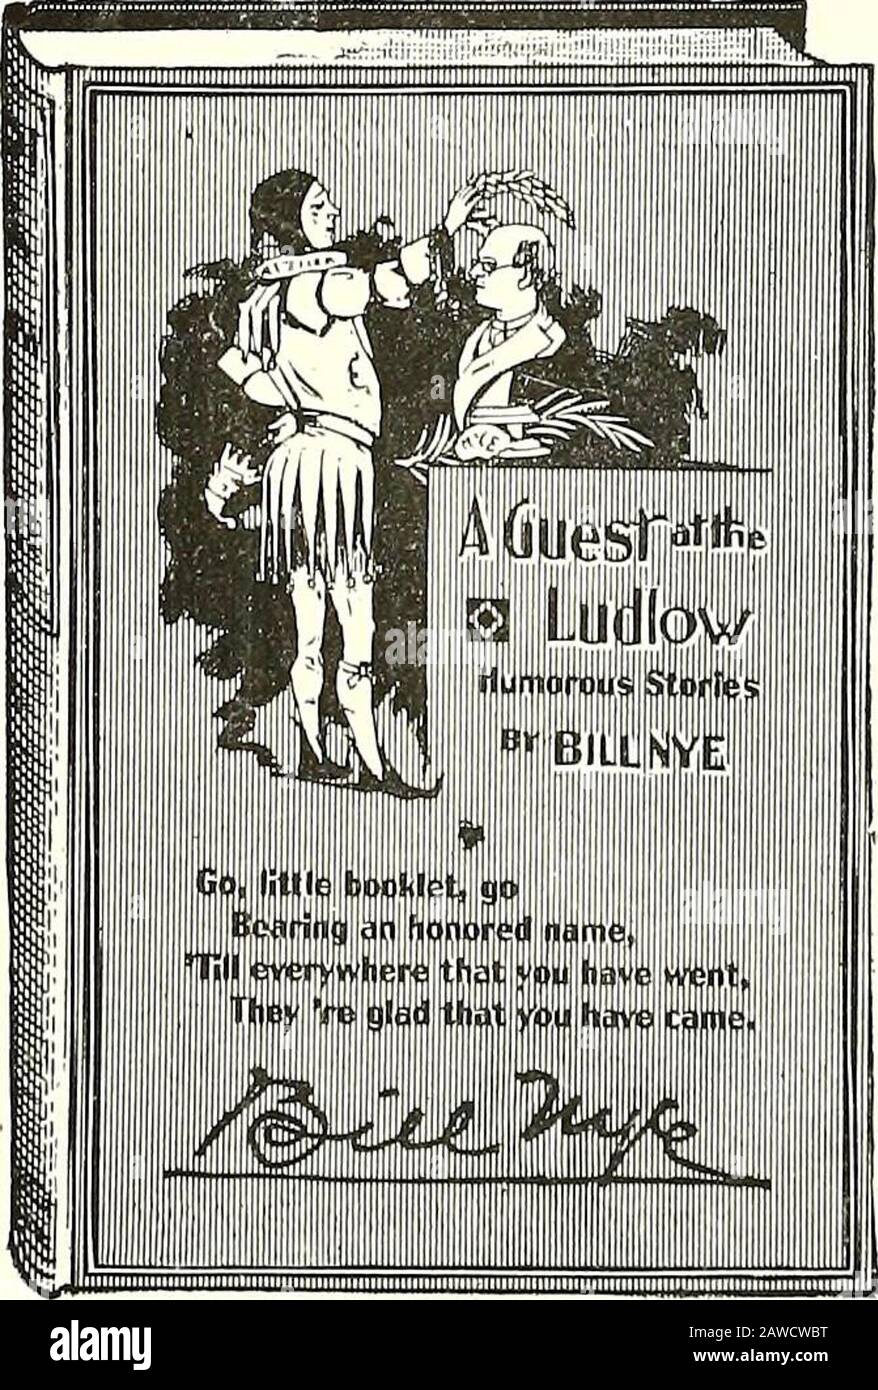 The Colorado Collegian Oct1896-June 1899 . Published by THE BOWEN-MERRILLCO., Indianapolis For sale by all booksellers, or will be sent by the publishers, postage prepaid, to any part of the United States, Canada or Mexico on receipt of the price. BILL NYES FUNNIEST BOOK A GUEST AT THE LUDLOW A Volume of Humorous Stories and Sketches By EDGAR WILSON NYE [bill nye] with twenty full page and twelve smaller designs, the latter by the AUTHOR ¥ INTRODUCTIONGo, little booklet, go!— Bearing an honored name,Till everywhere that you havewent,They re glad that you havecame.. Stock Photo